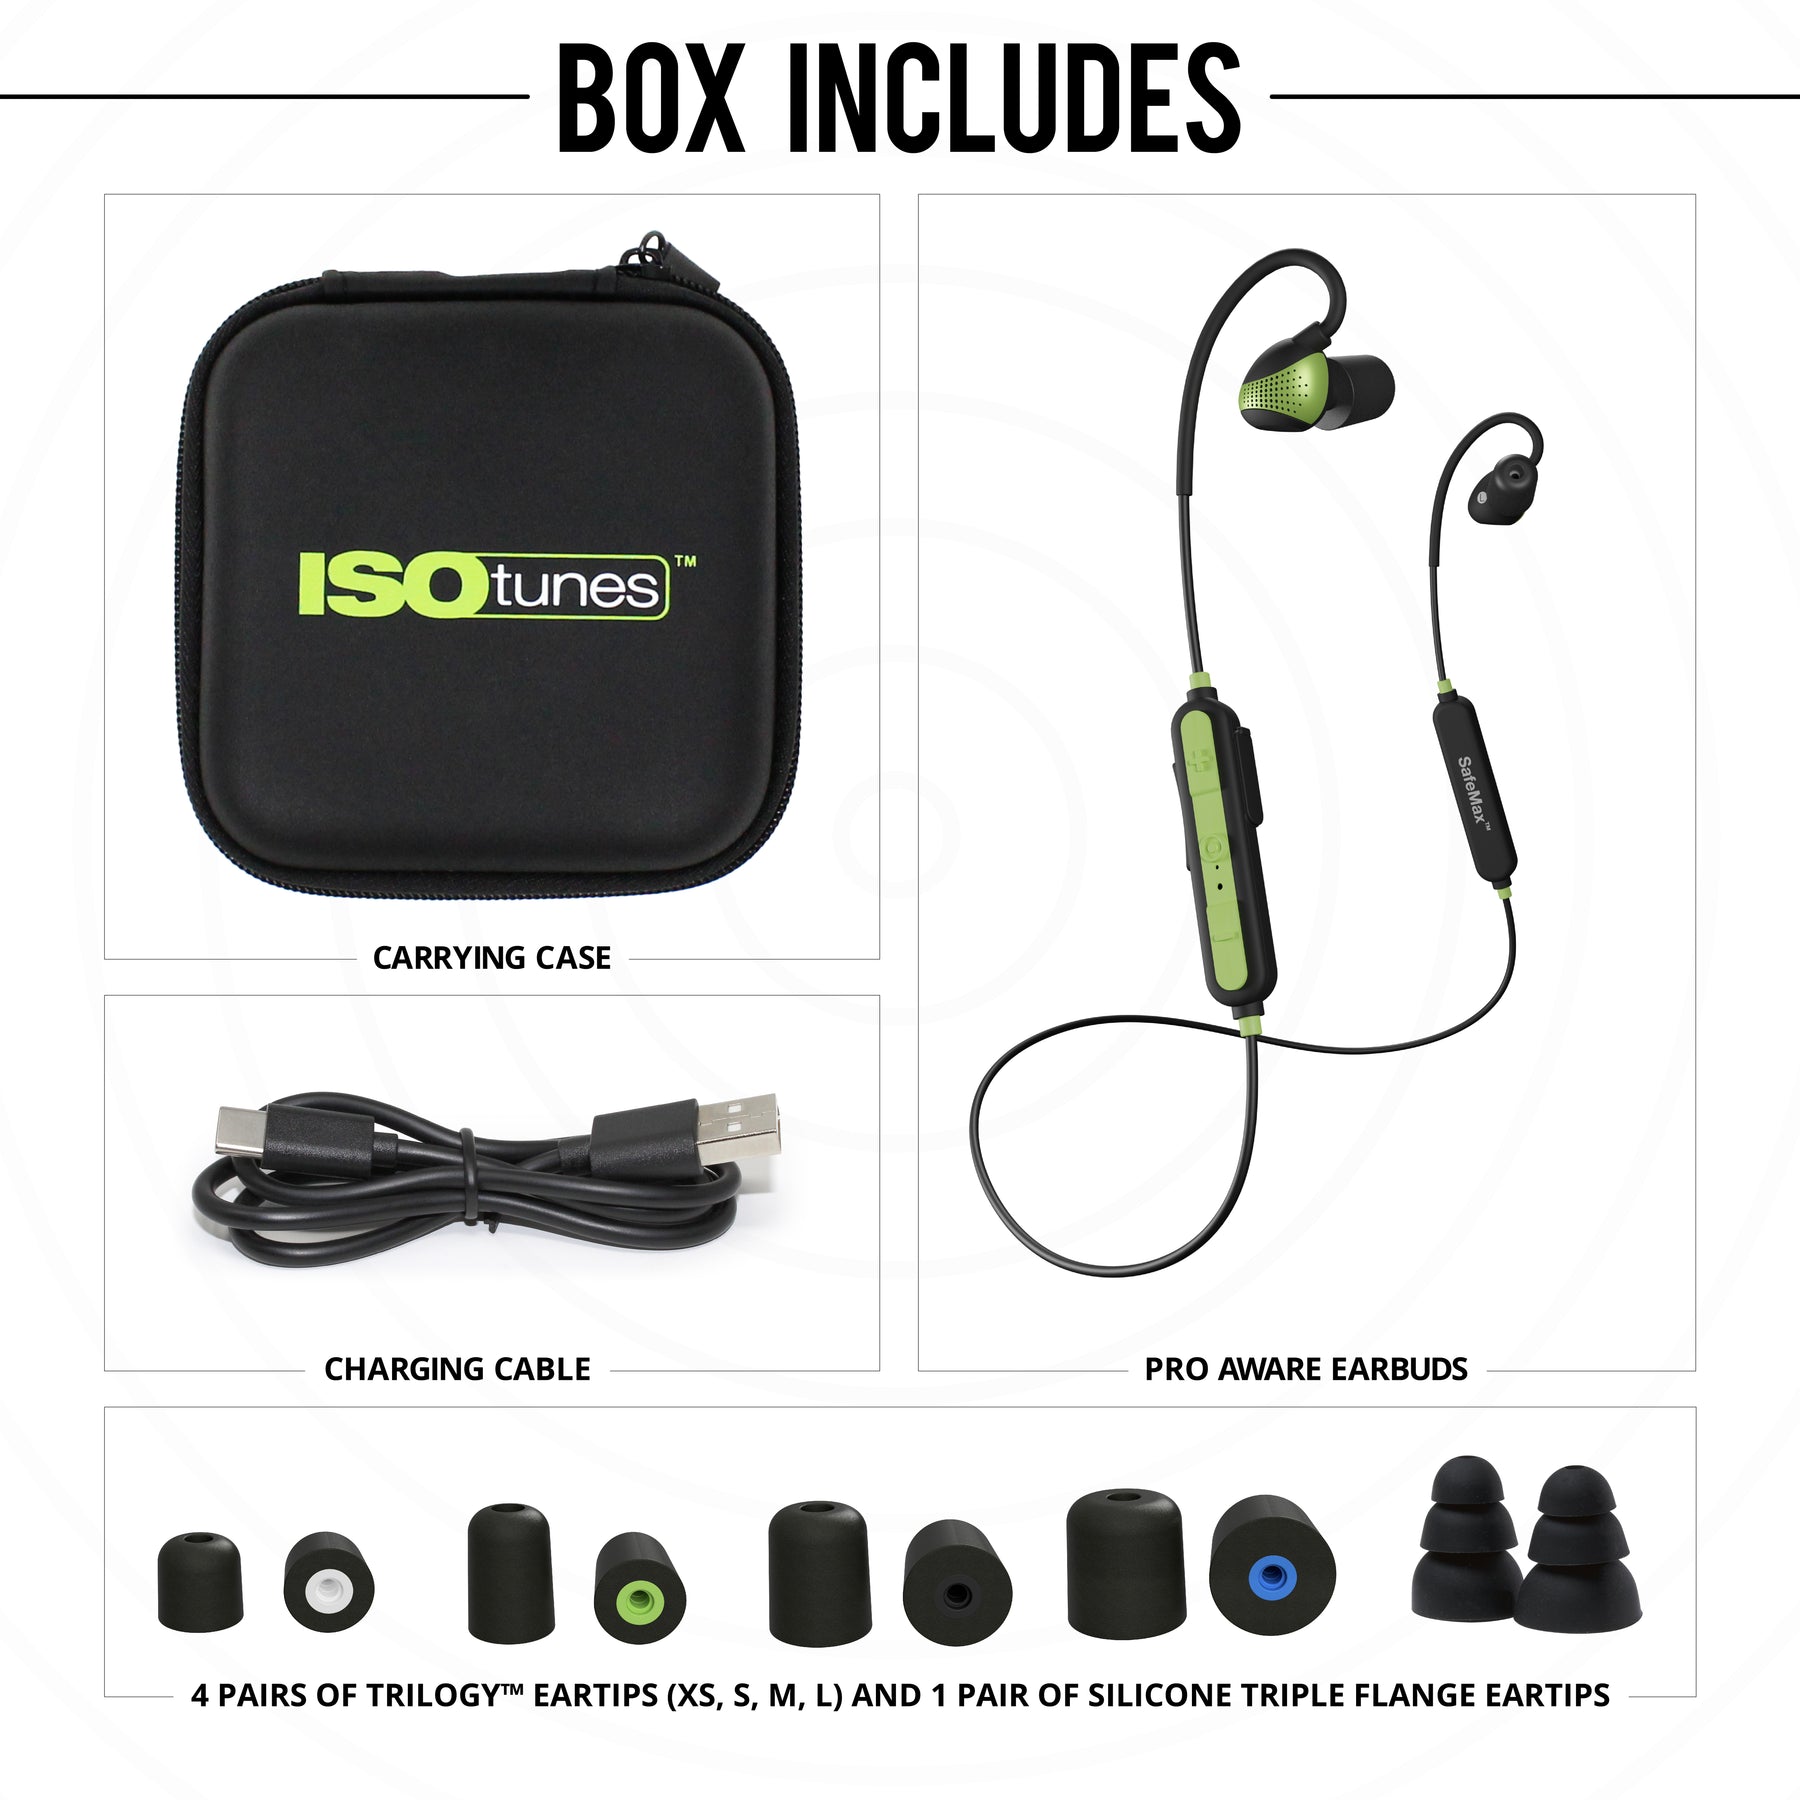 ISOtunes PRO Aware Electronic Earbuds Hearing Protection What's Inside